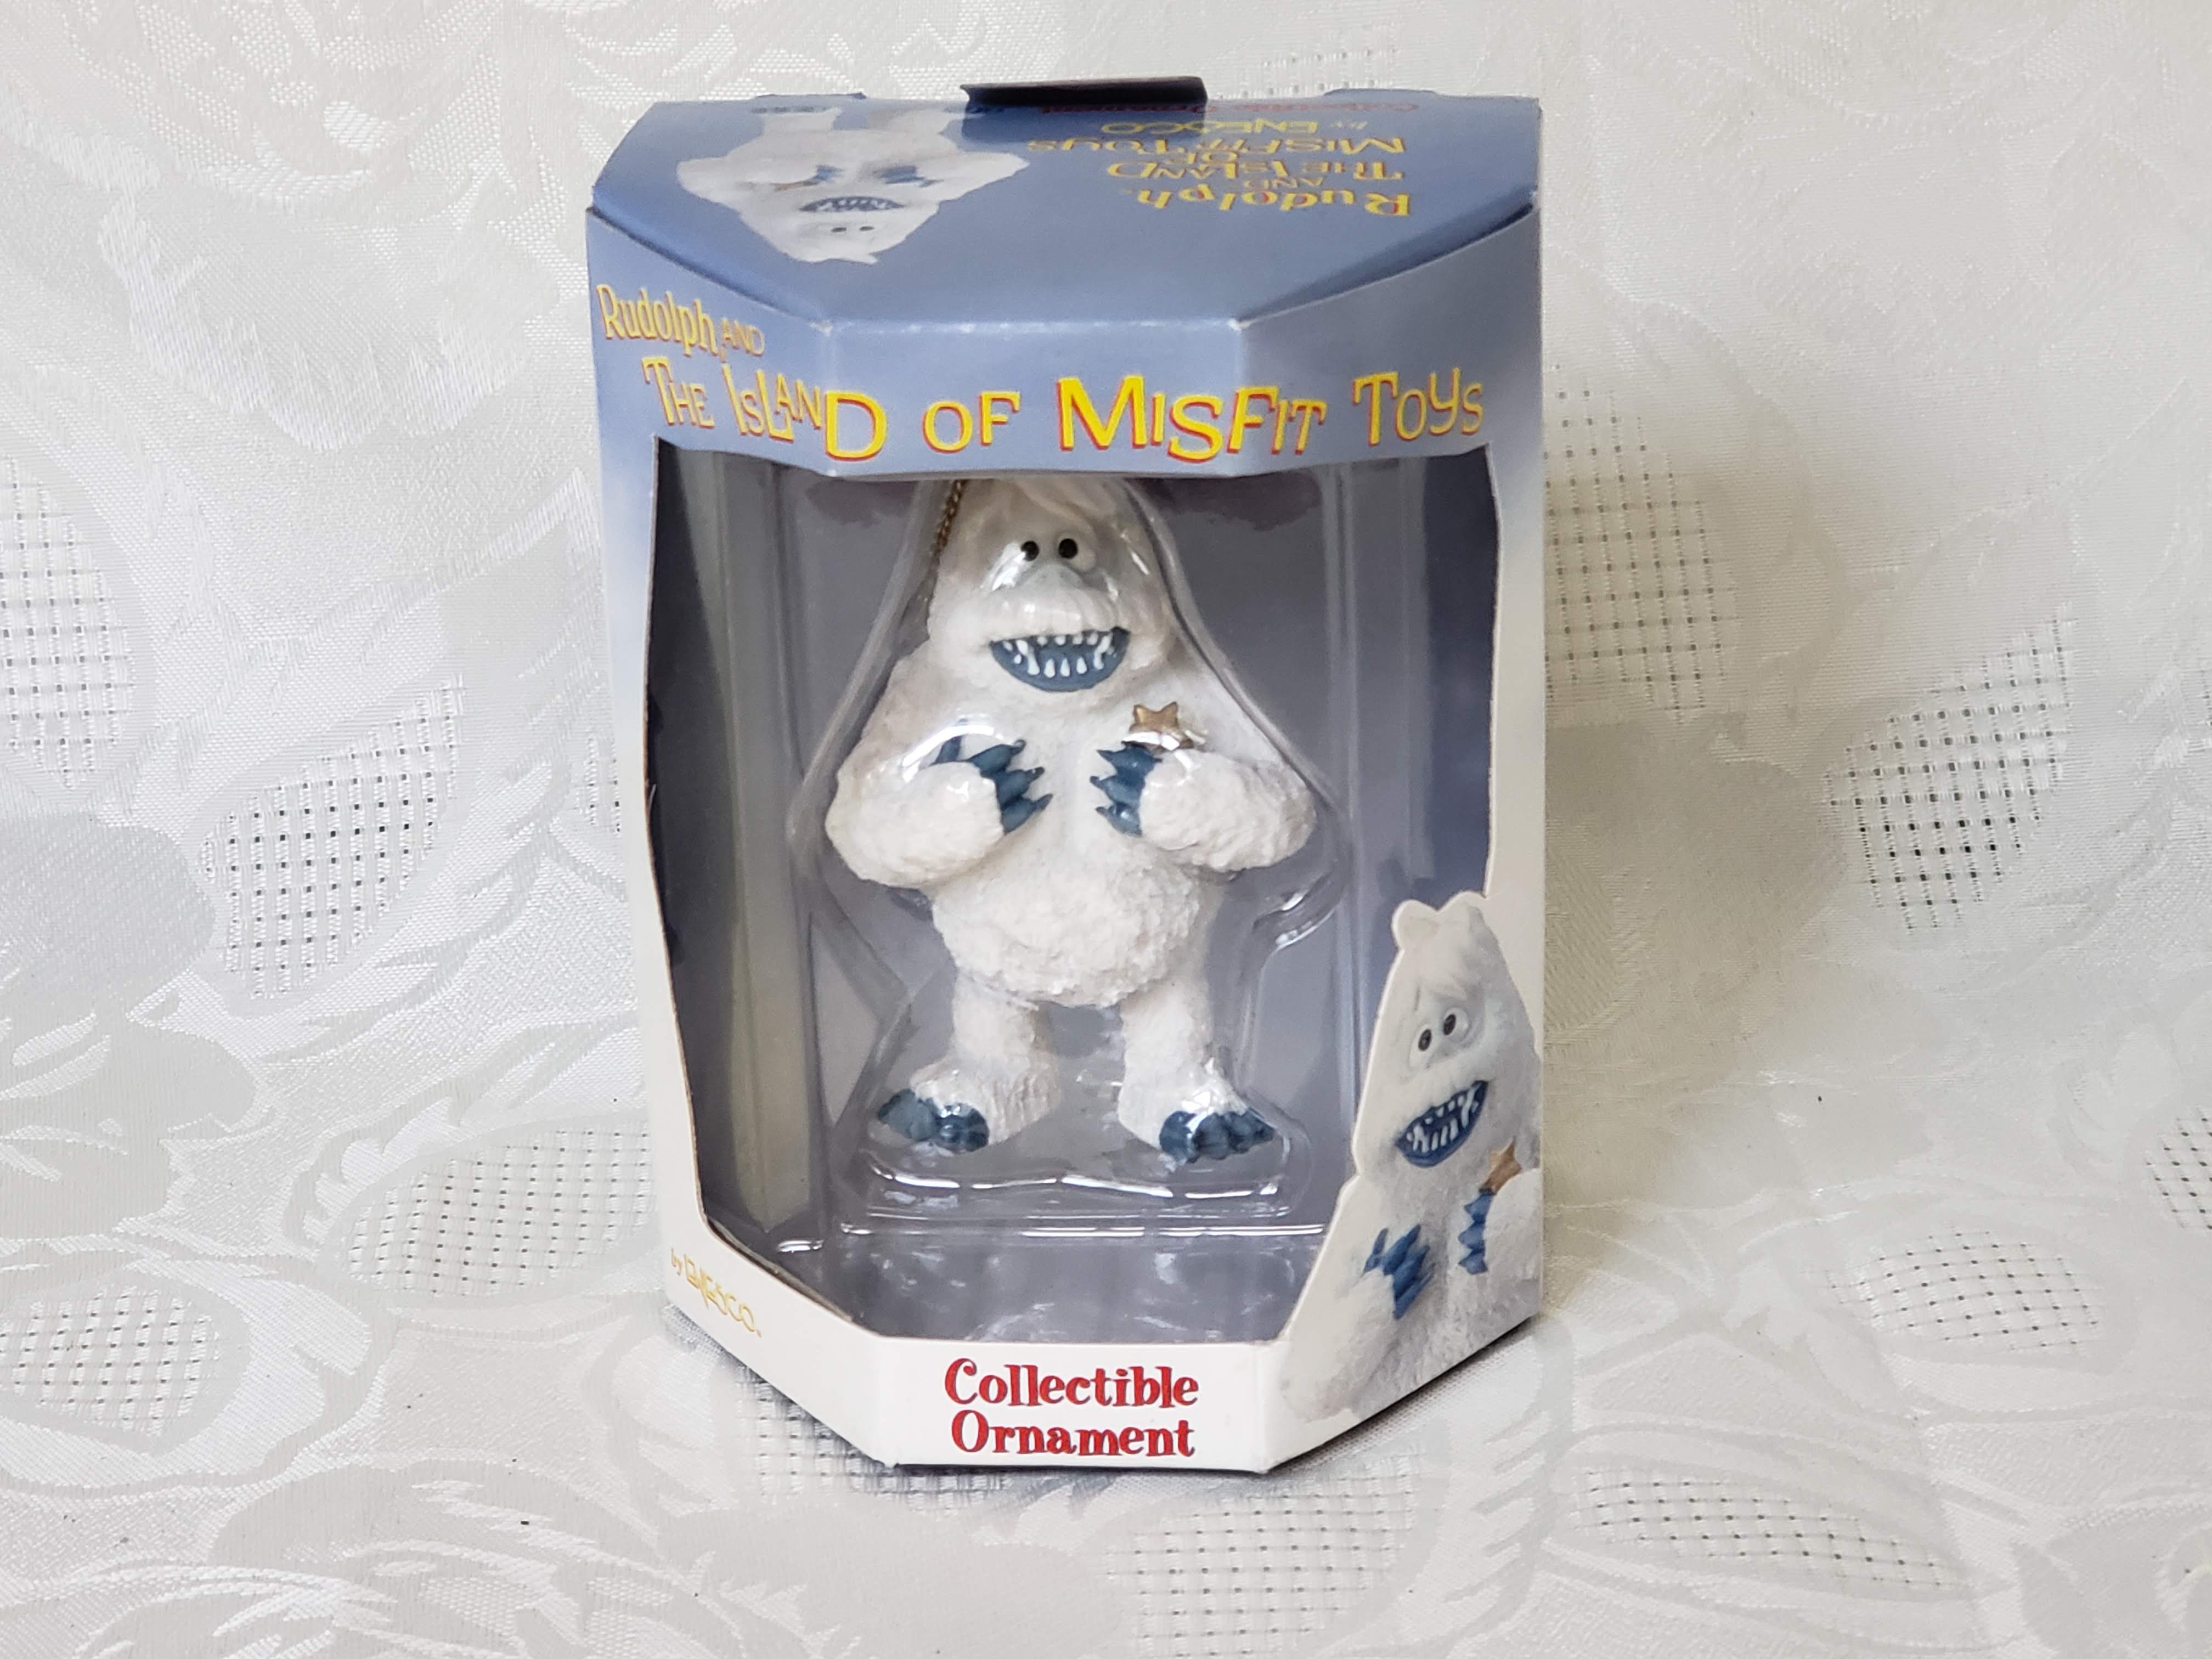 https://serstyle.com/wp-content/uploads/2018/10/Rudolph-and-the-Island-of-Misfit-Toys-Abominable-Snowman-Christmas-Ornament.jpg